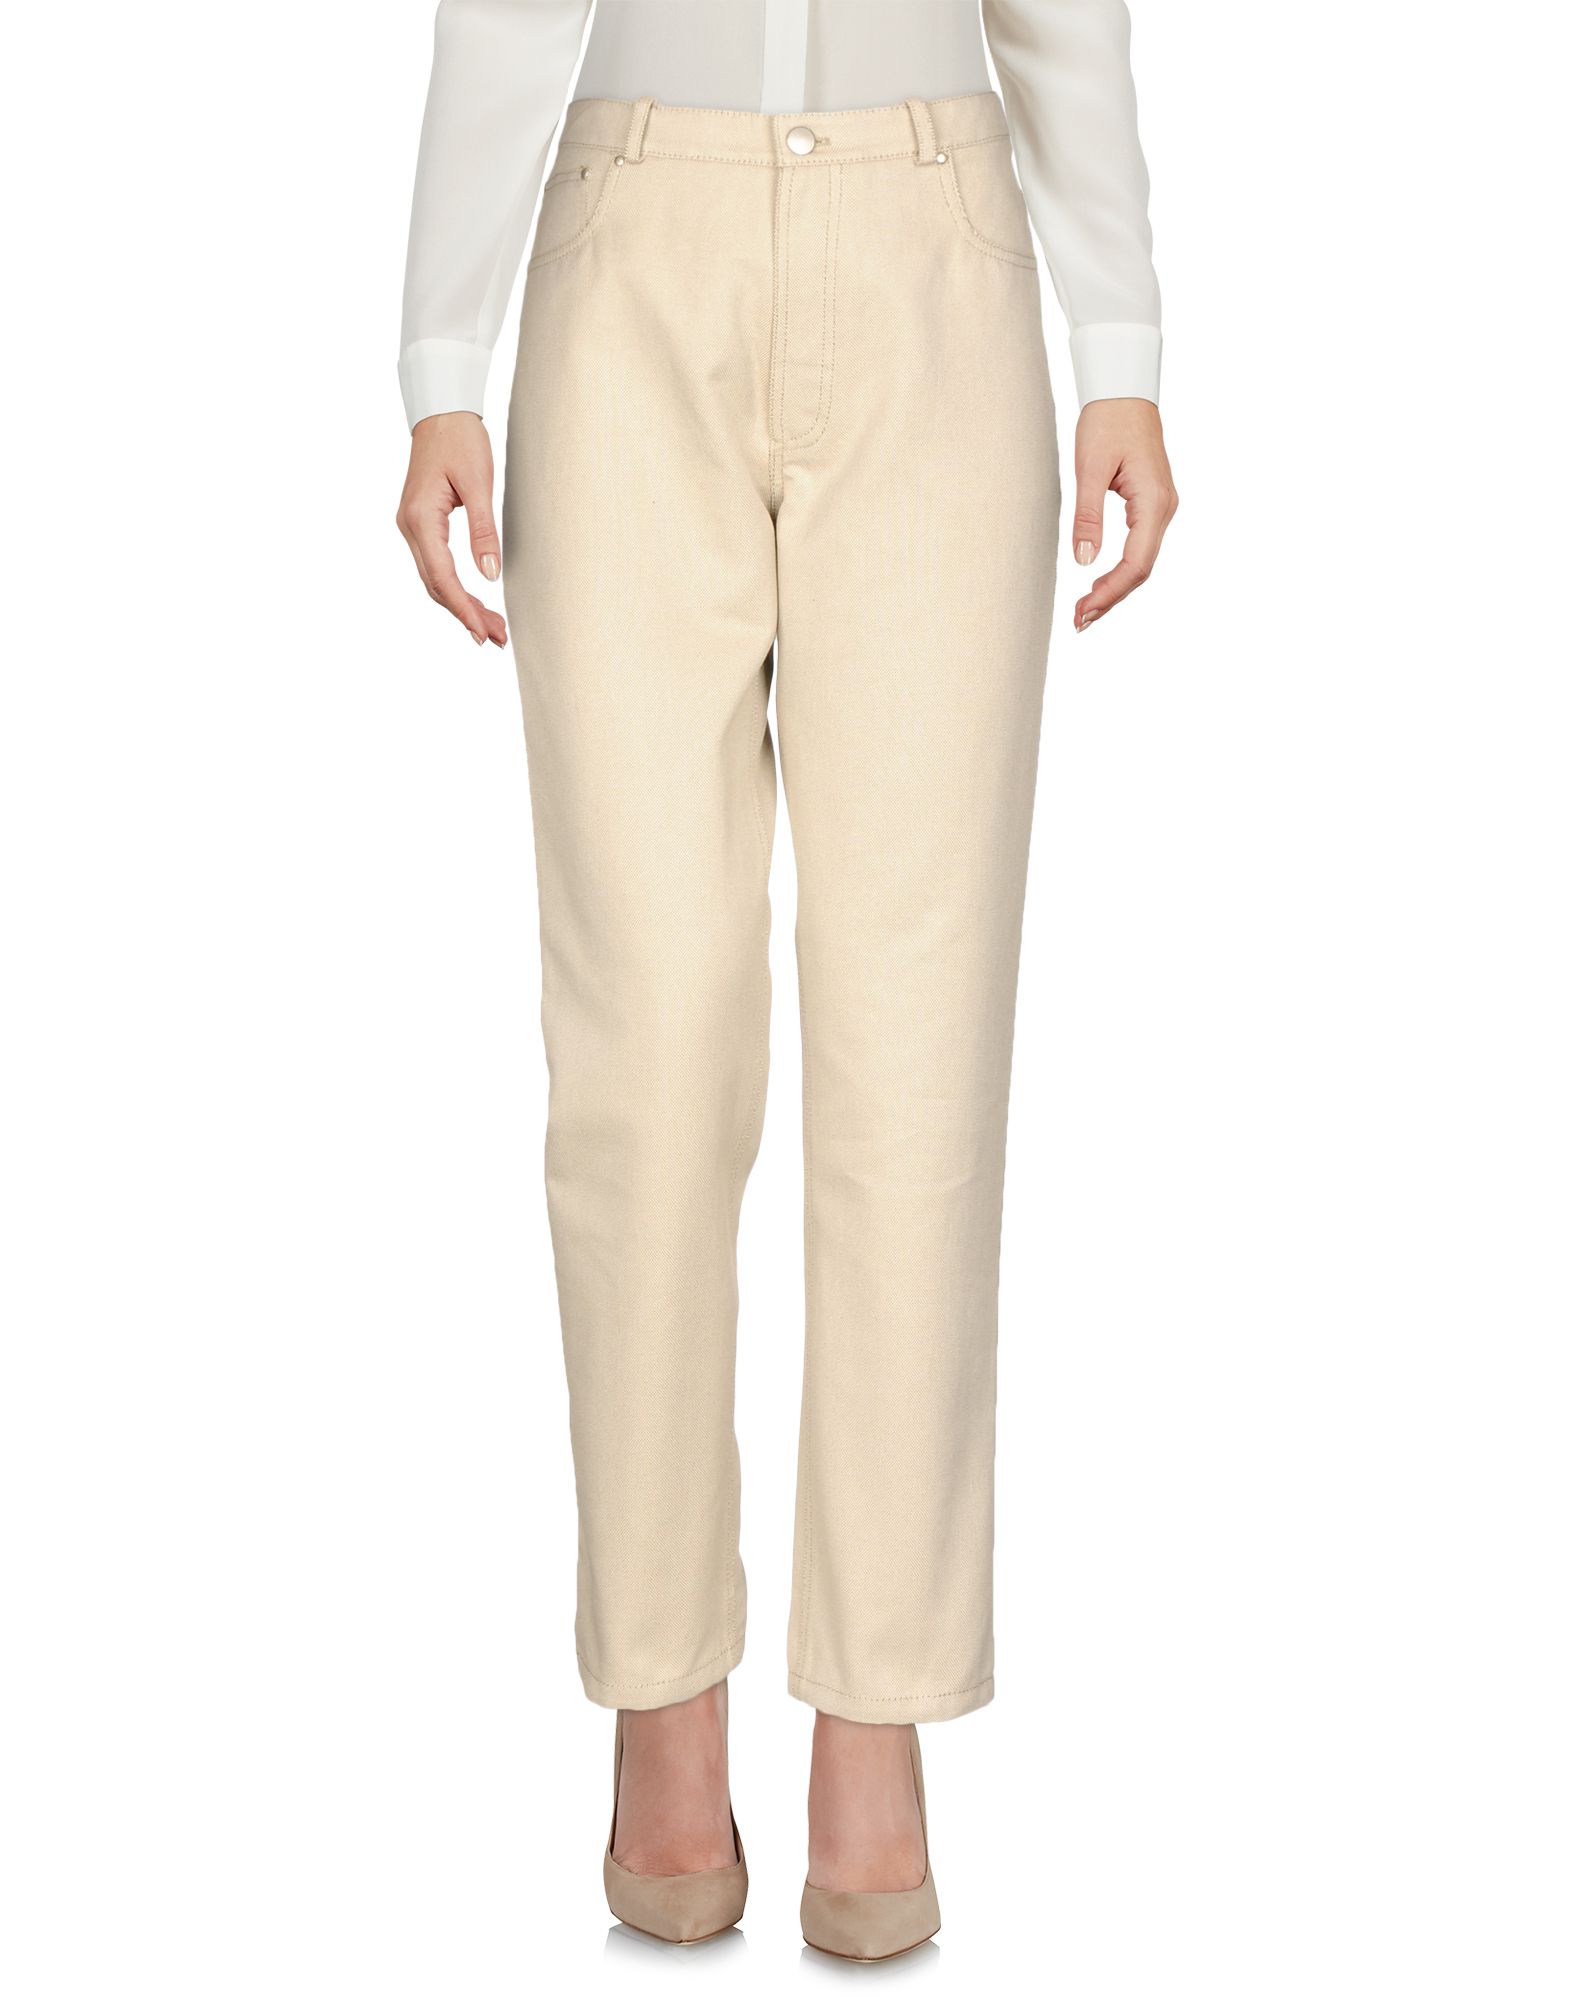 JW ANDERSON Casual pants,13182973WL 3